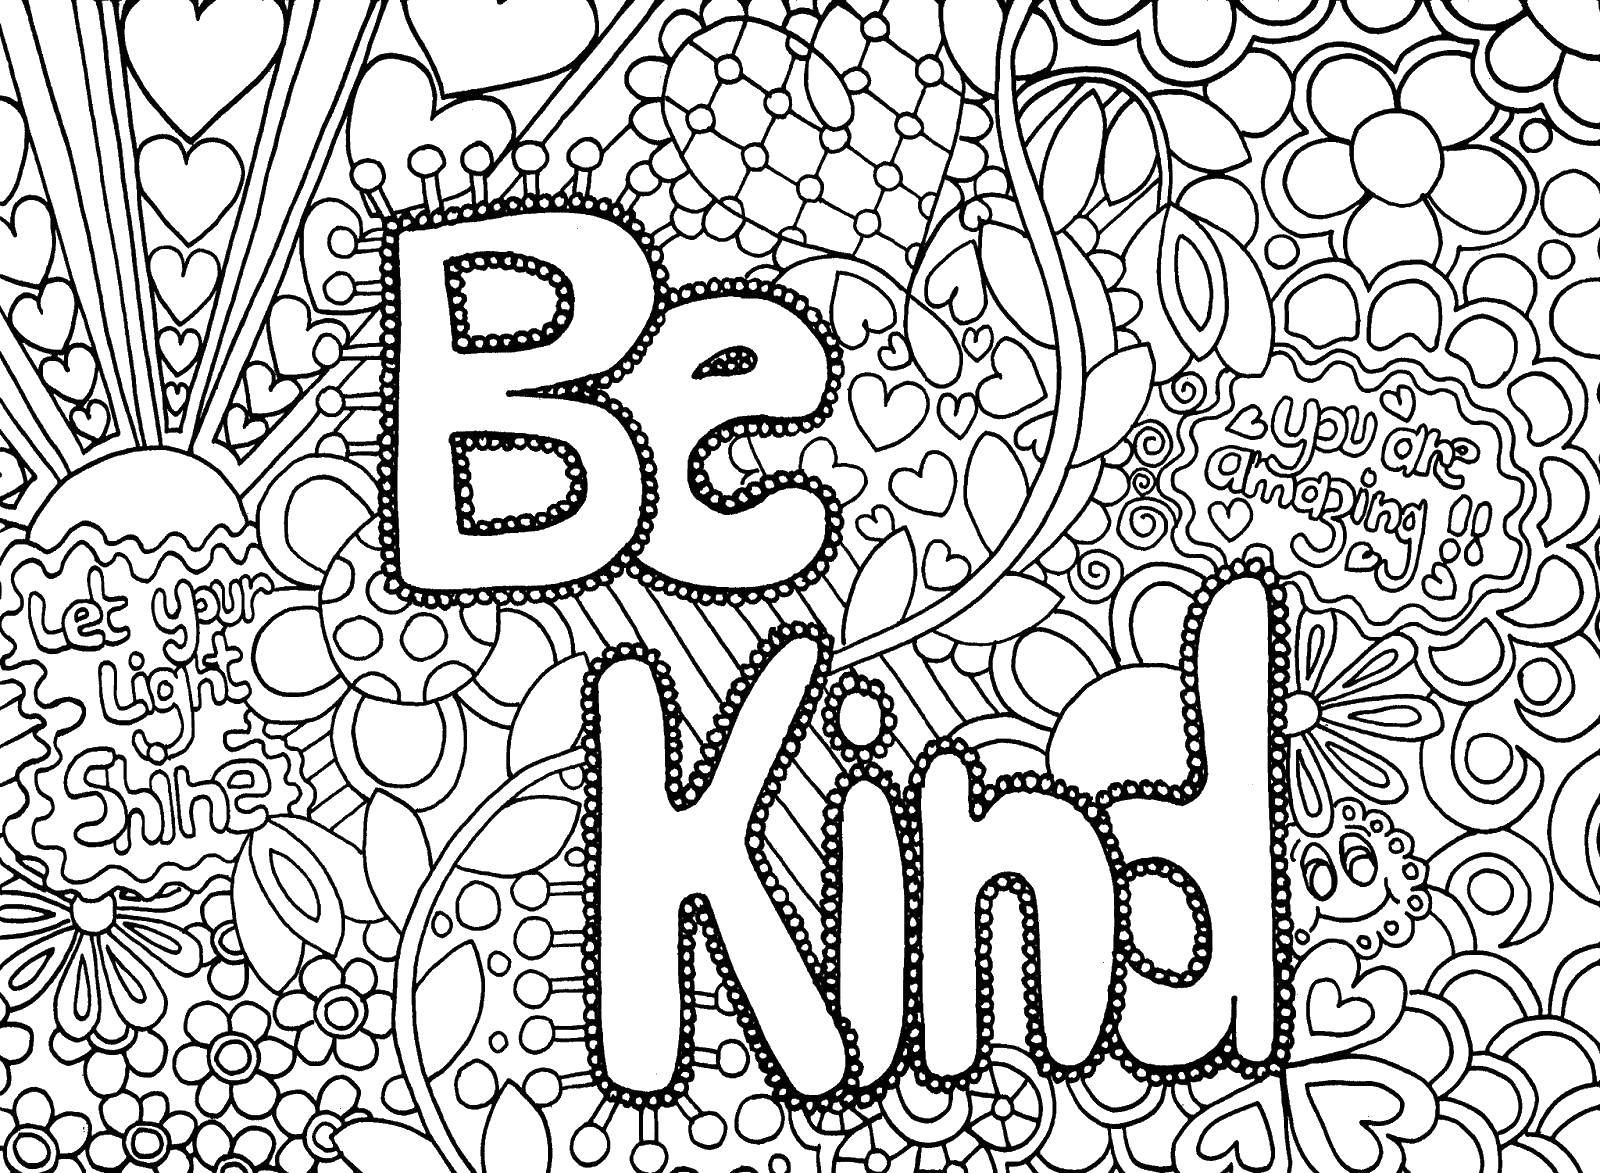 Coloring Be kind. Category coloring pages for teenagers. Tags:  Labels, patterns.